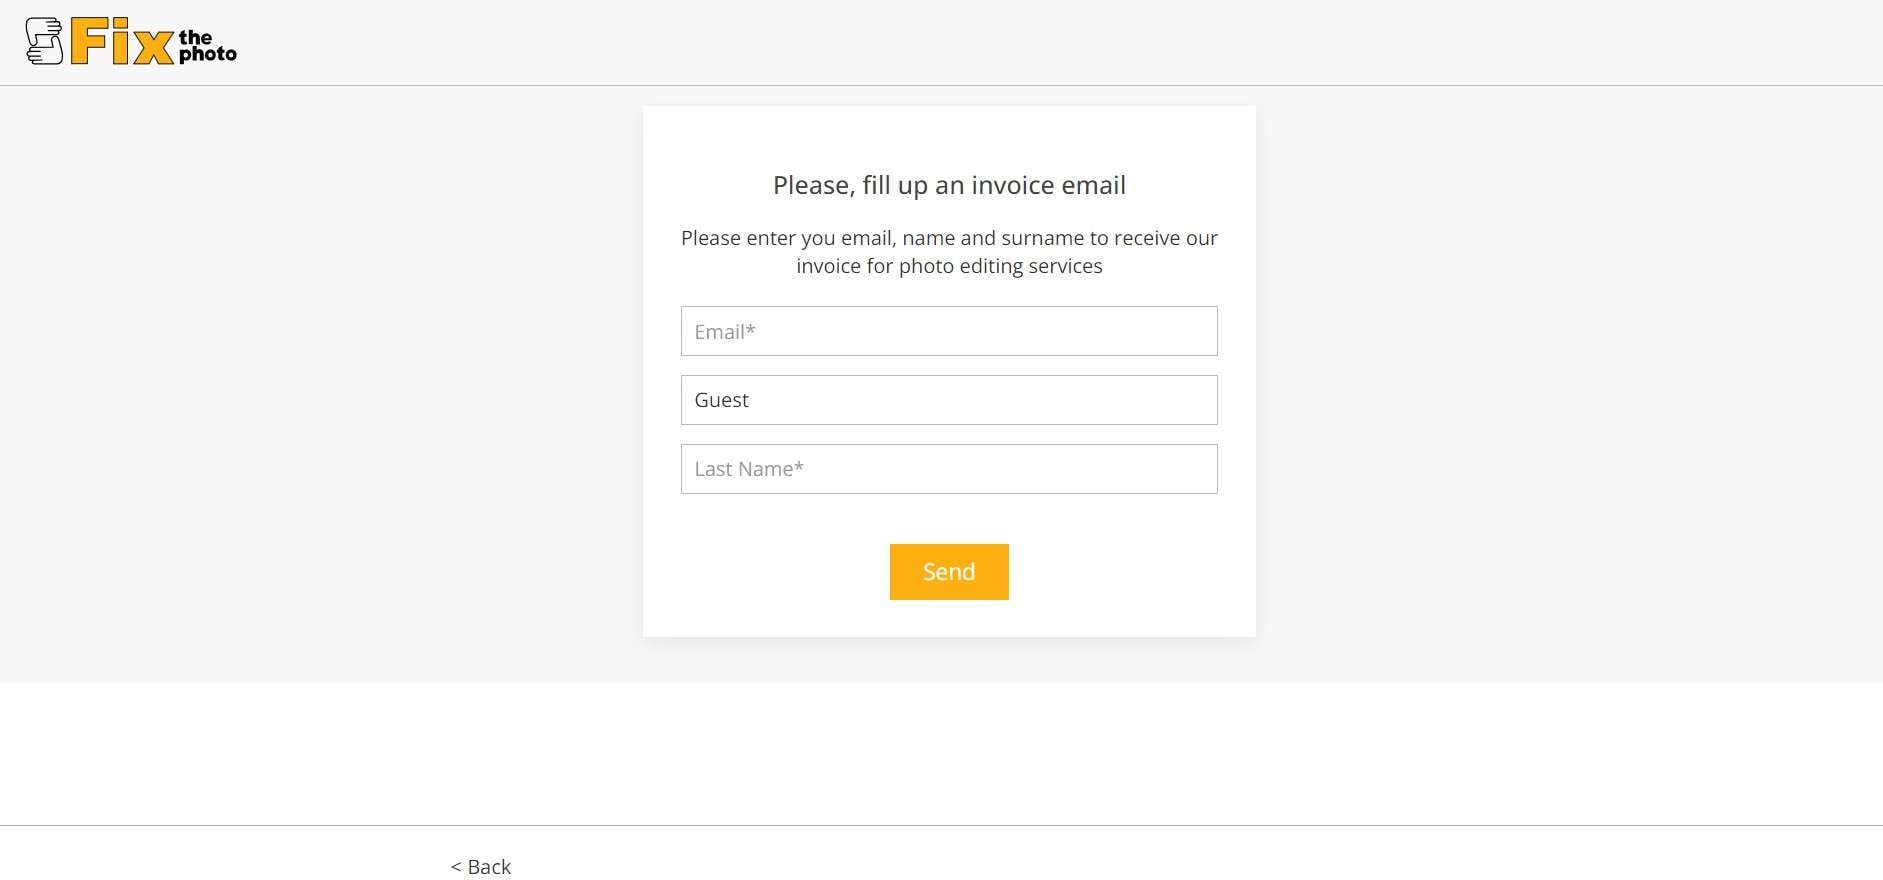 fixthephoto fill up an invoice email